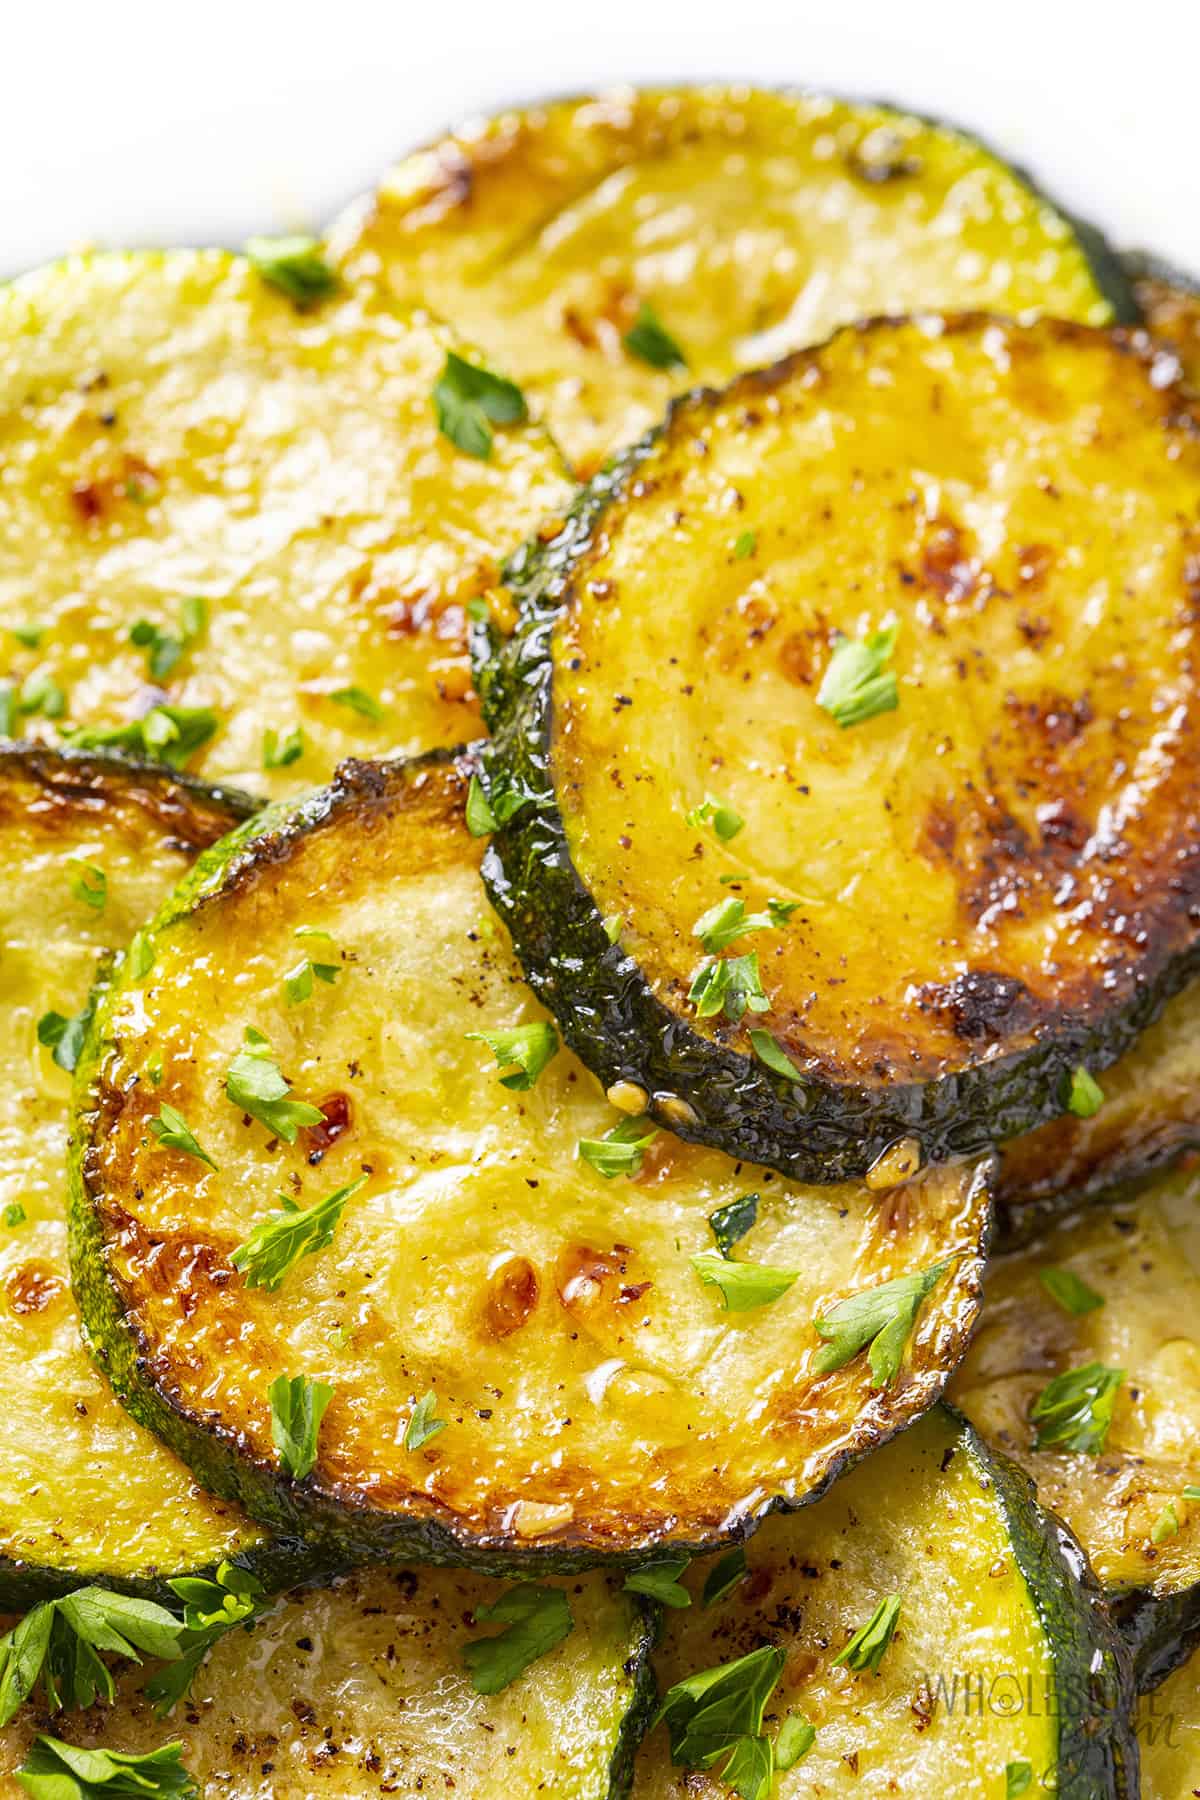 Pan cooked zucchini close up.